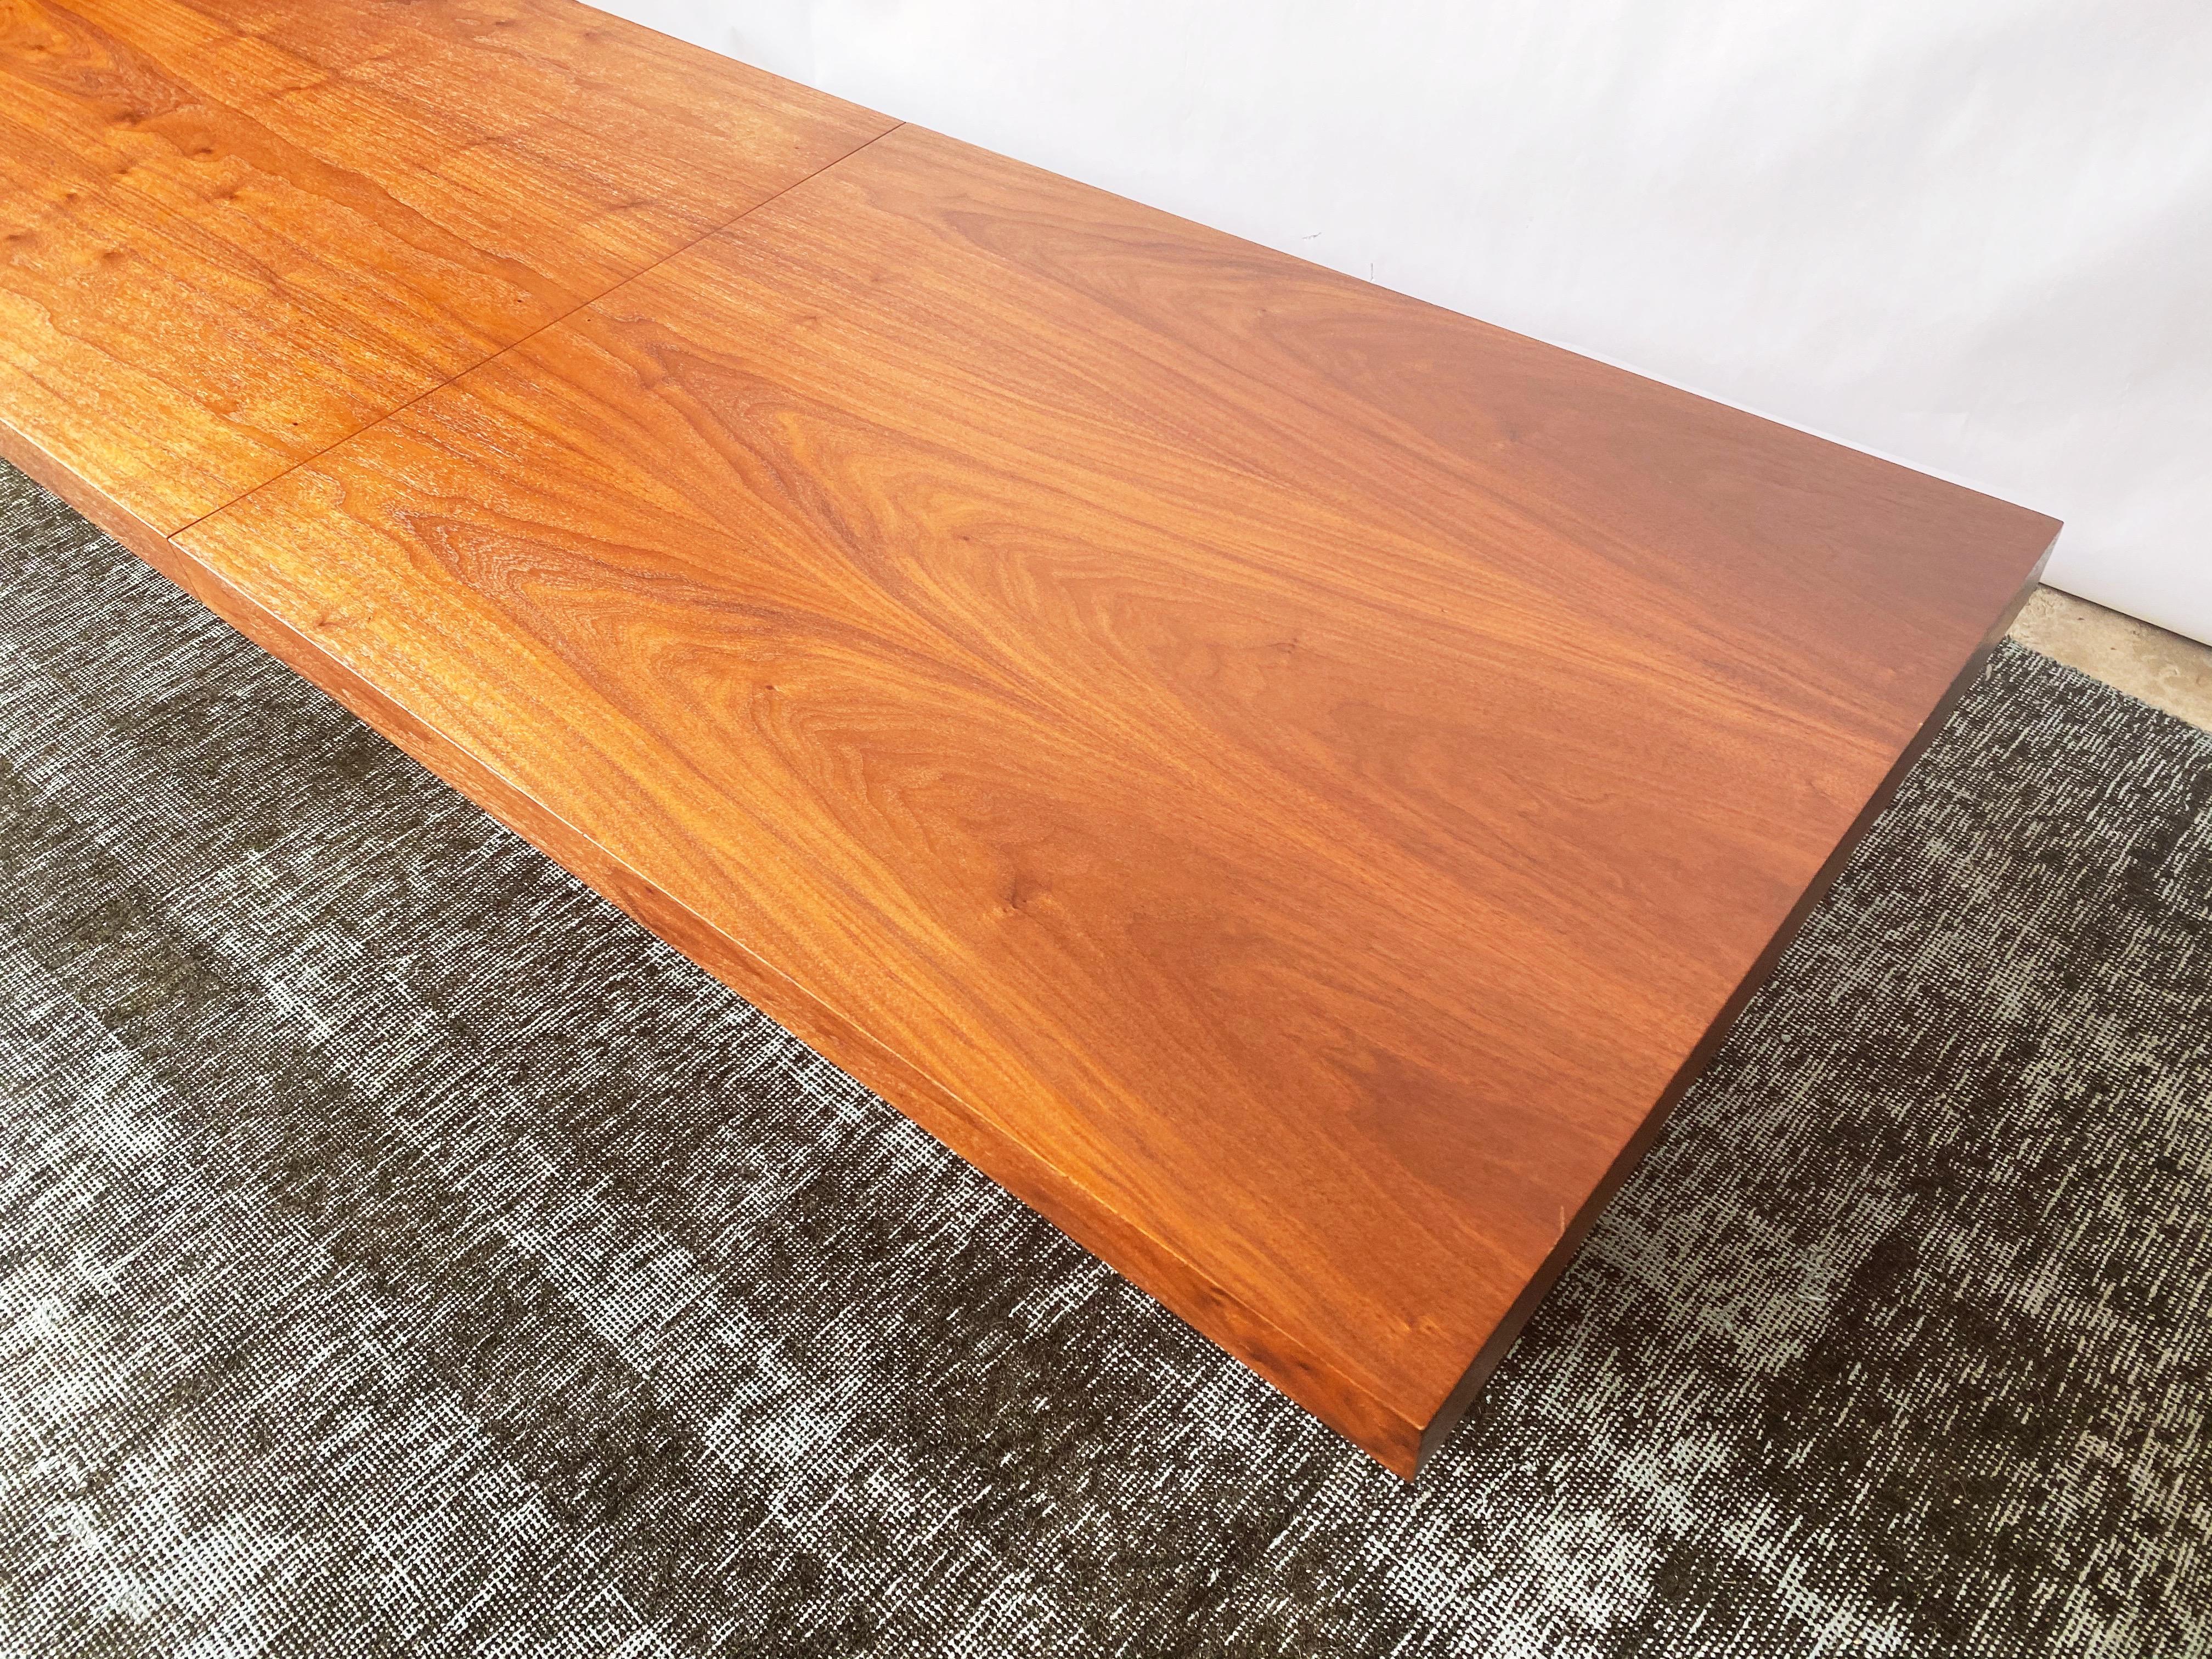 American Vintage Walnut Expandable Coffee Table by John Keal for Brown Saltman, c. 1960s